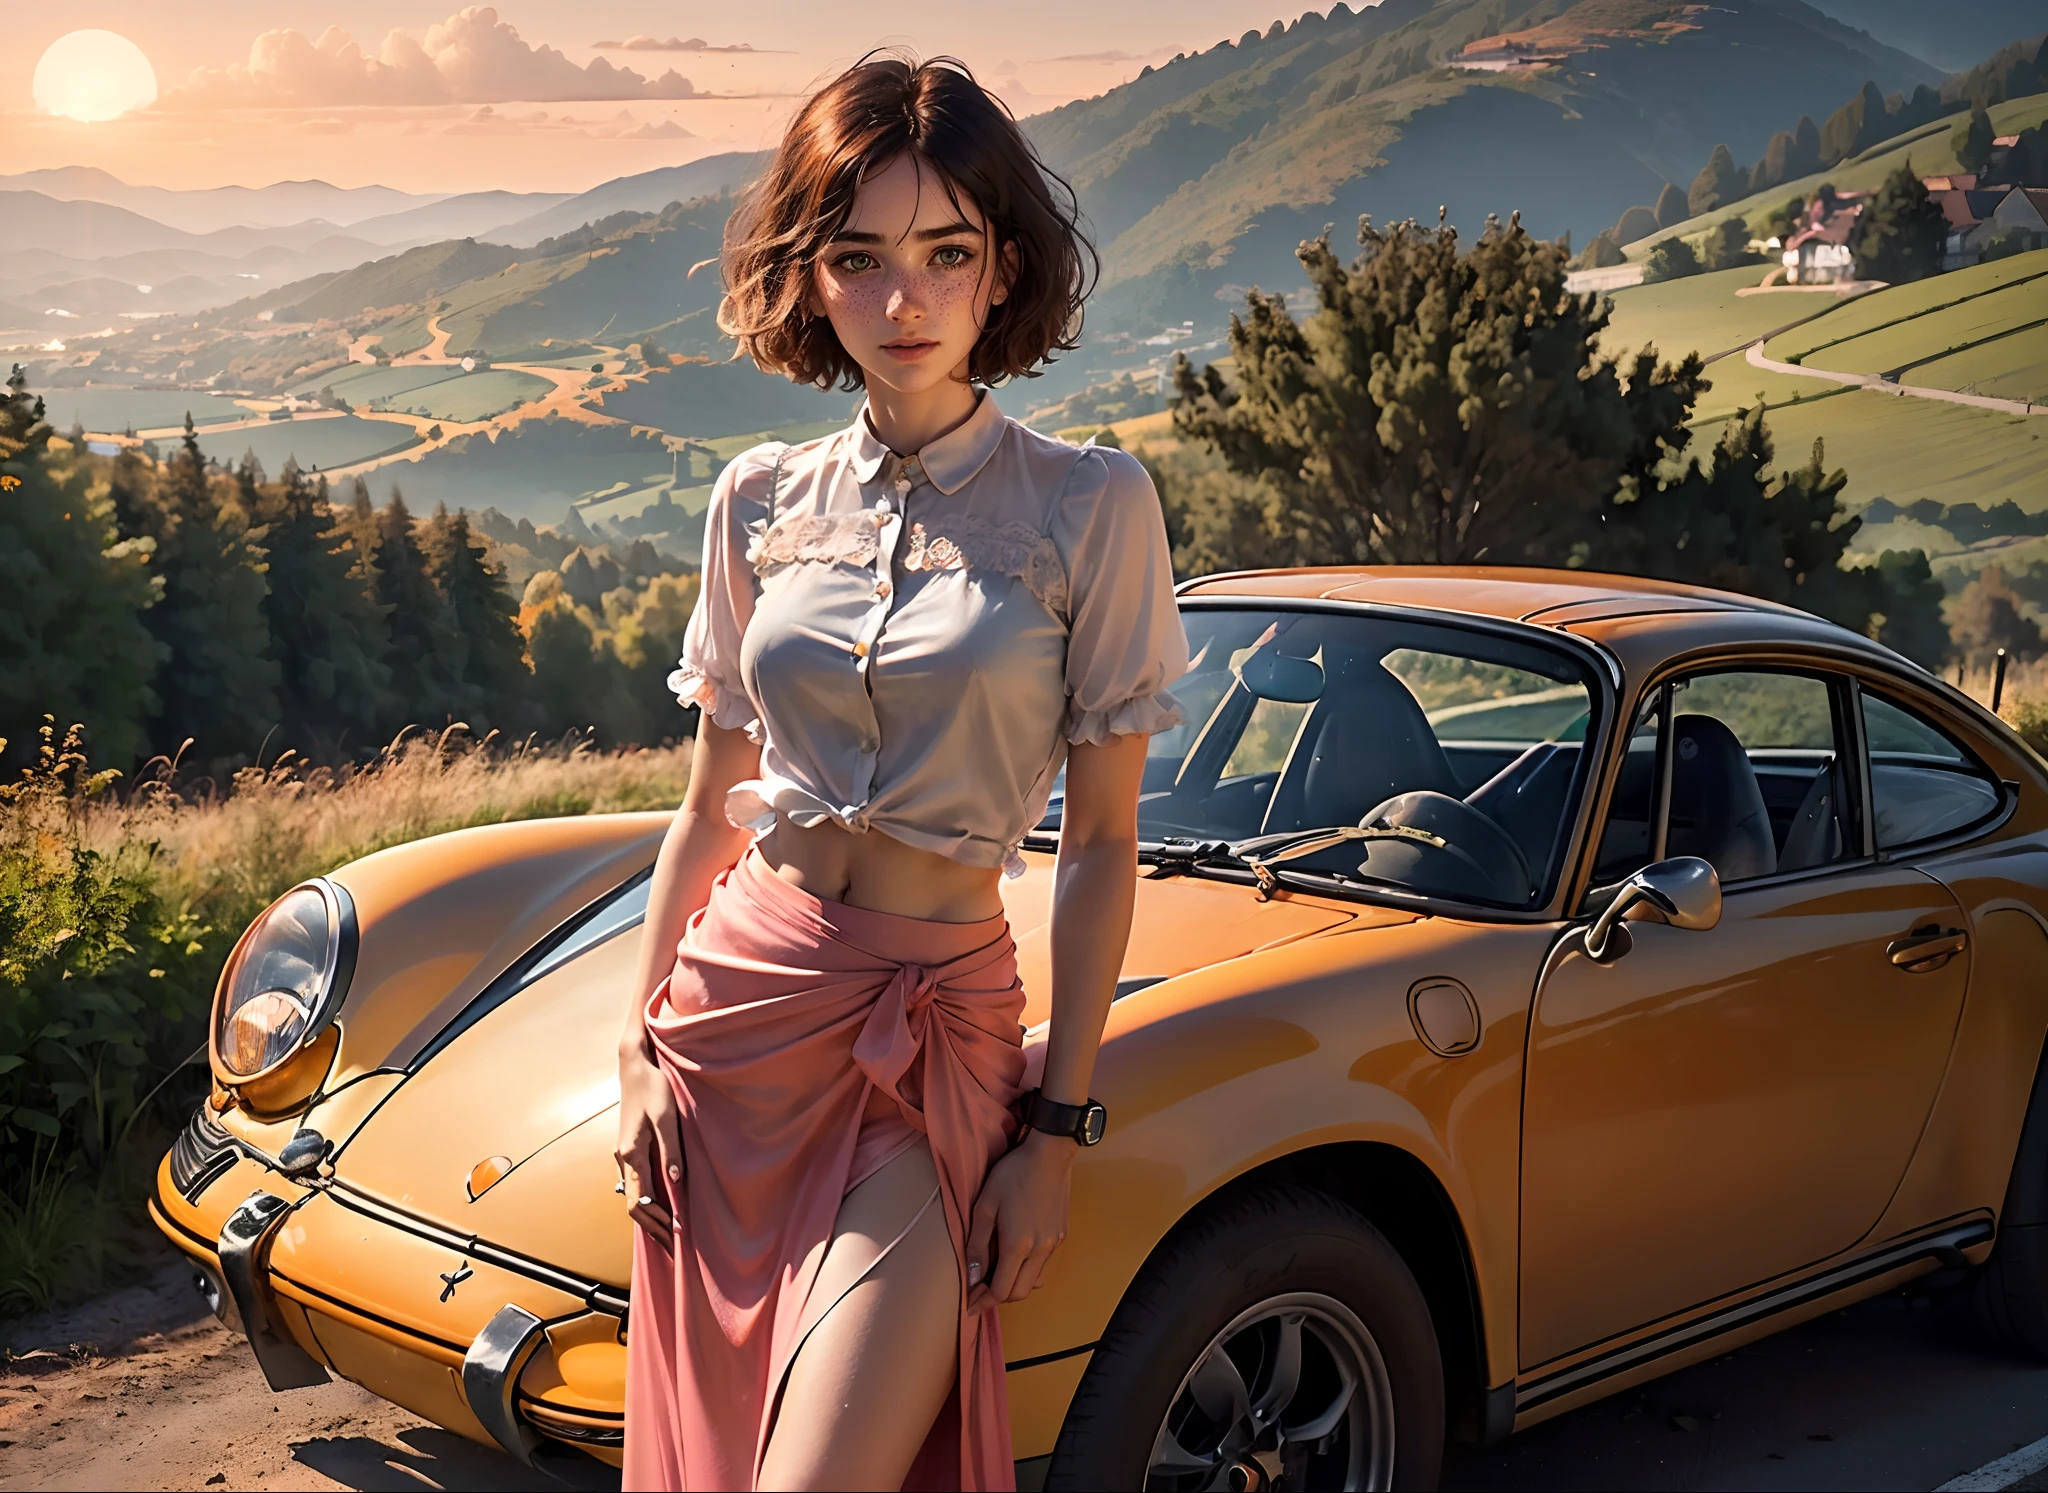 (((realistic))), (a girl stand leaning against front a pale orange vintage porsche car:1.6), girl focus, ((see through white frilly shirt:1.3), full body, (pink maxi satin skirt:1.3), (sweaty)), (flashing panty:1.2), 25 years old, (beautiful puffy clouds,  sunset sky), (sunset, lush autumn hillside background:1.5), ((small chest, slim, thin body)), (photography, realistic, bokeh, blur), ((wavy bob cut)), (cenimatic lights, soft lights, detailed lighting:1.3)